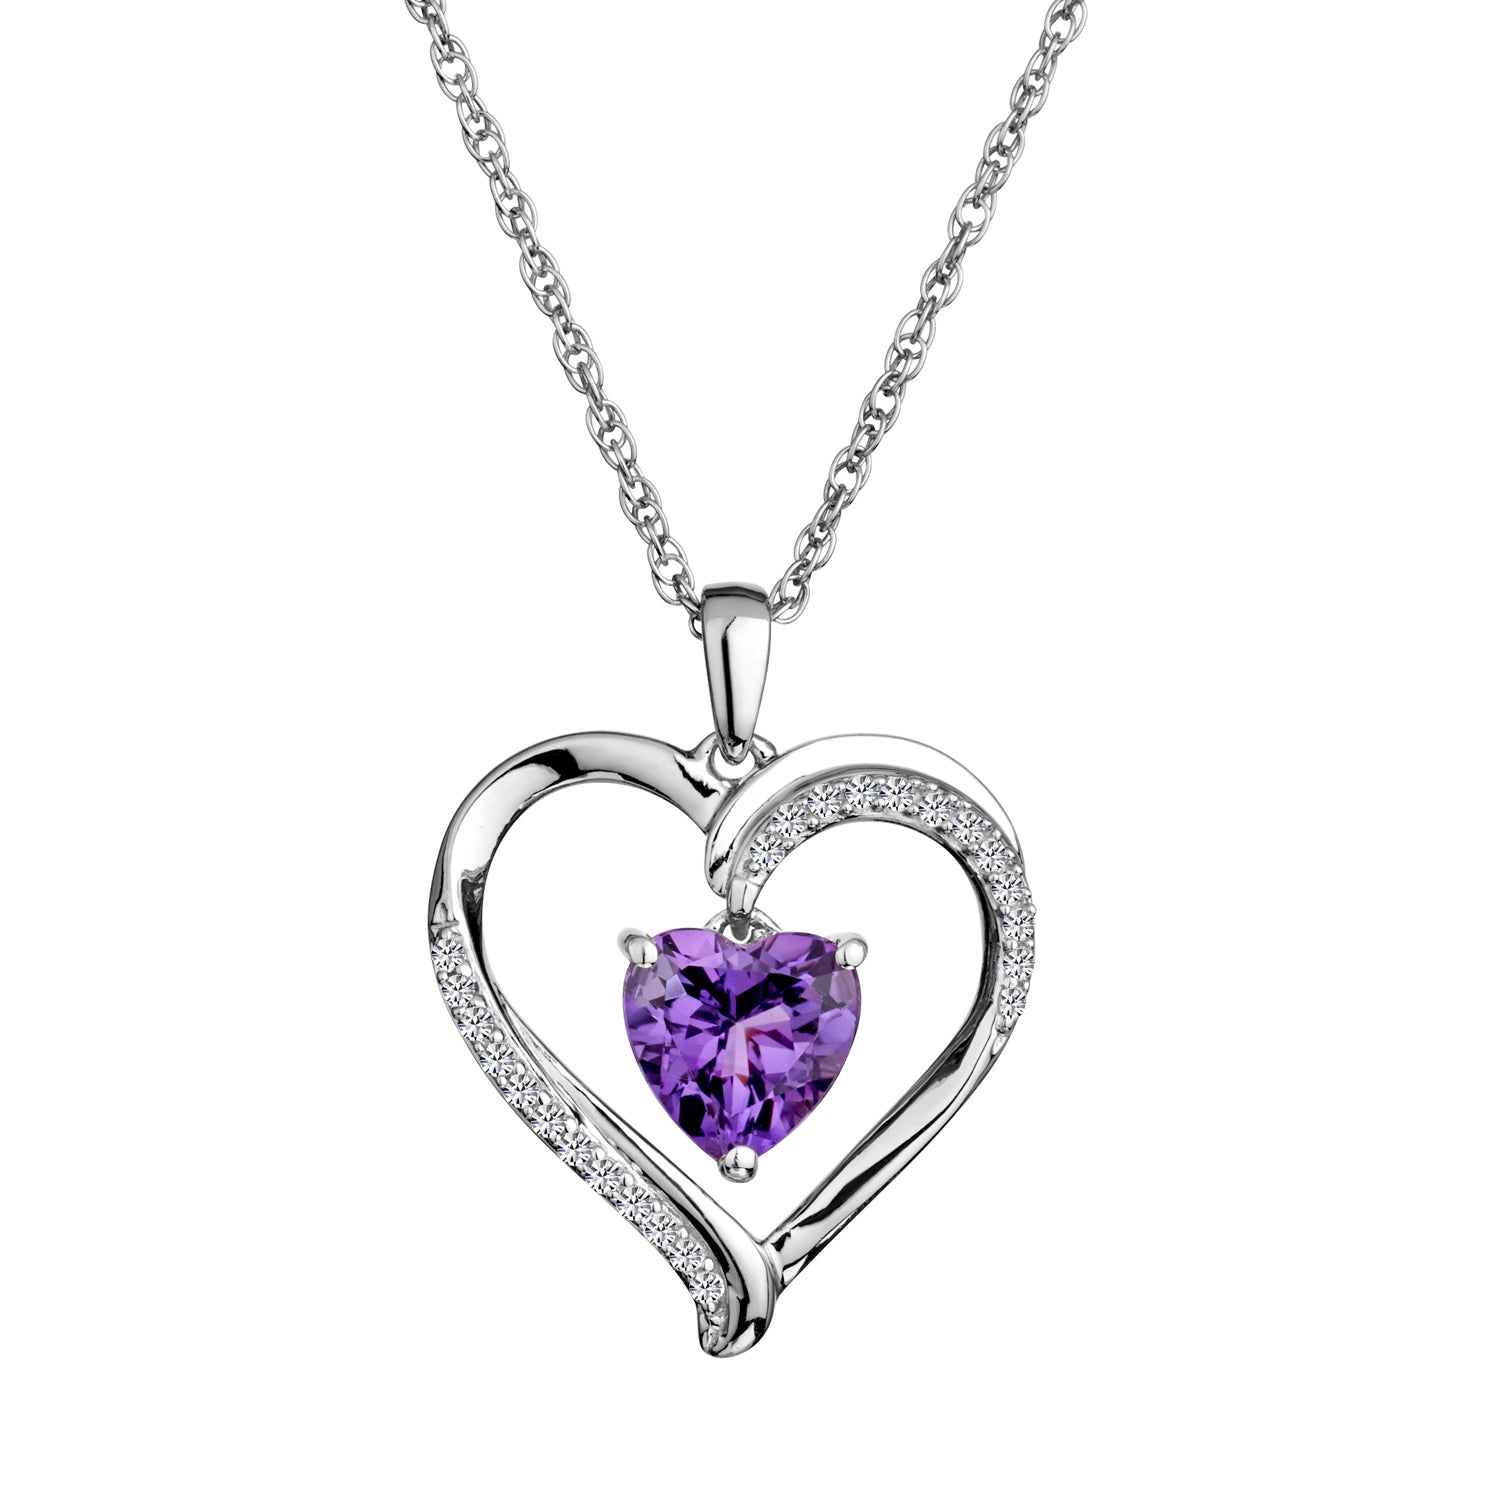 Created White Sapphire & Amethyst Heart Pendant,  Sterling Silver. Necklaces and Pendants. Griffin Jewellery Designs. 